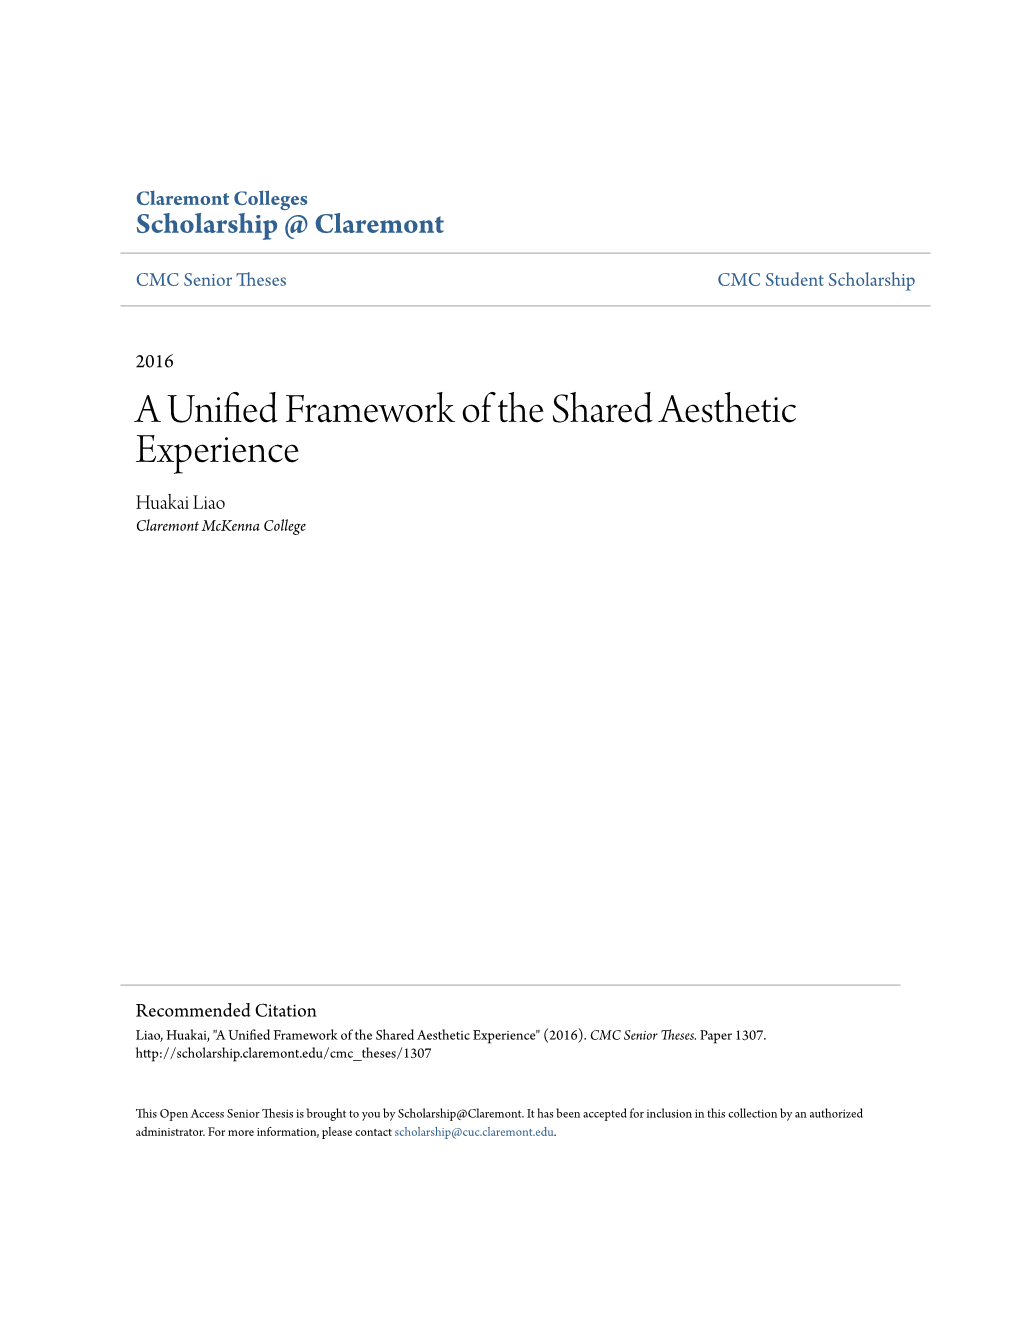 A Unified Framework of the Shared Aesthetic Experience" (2016)